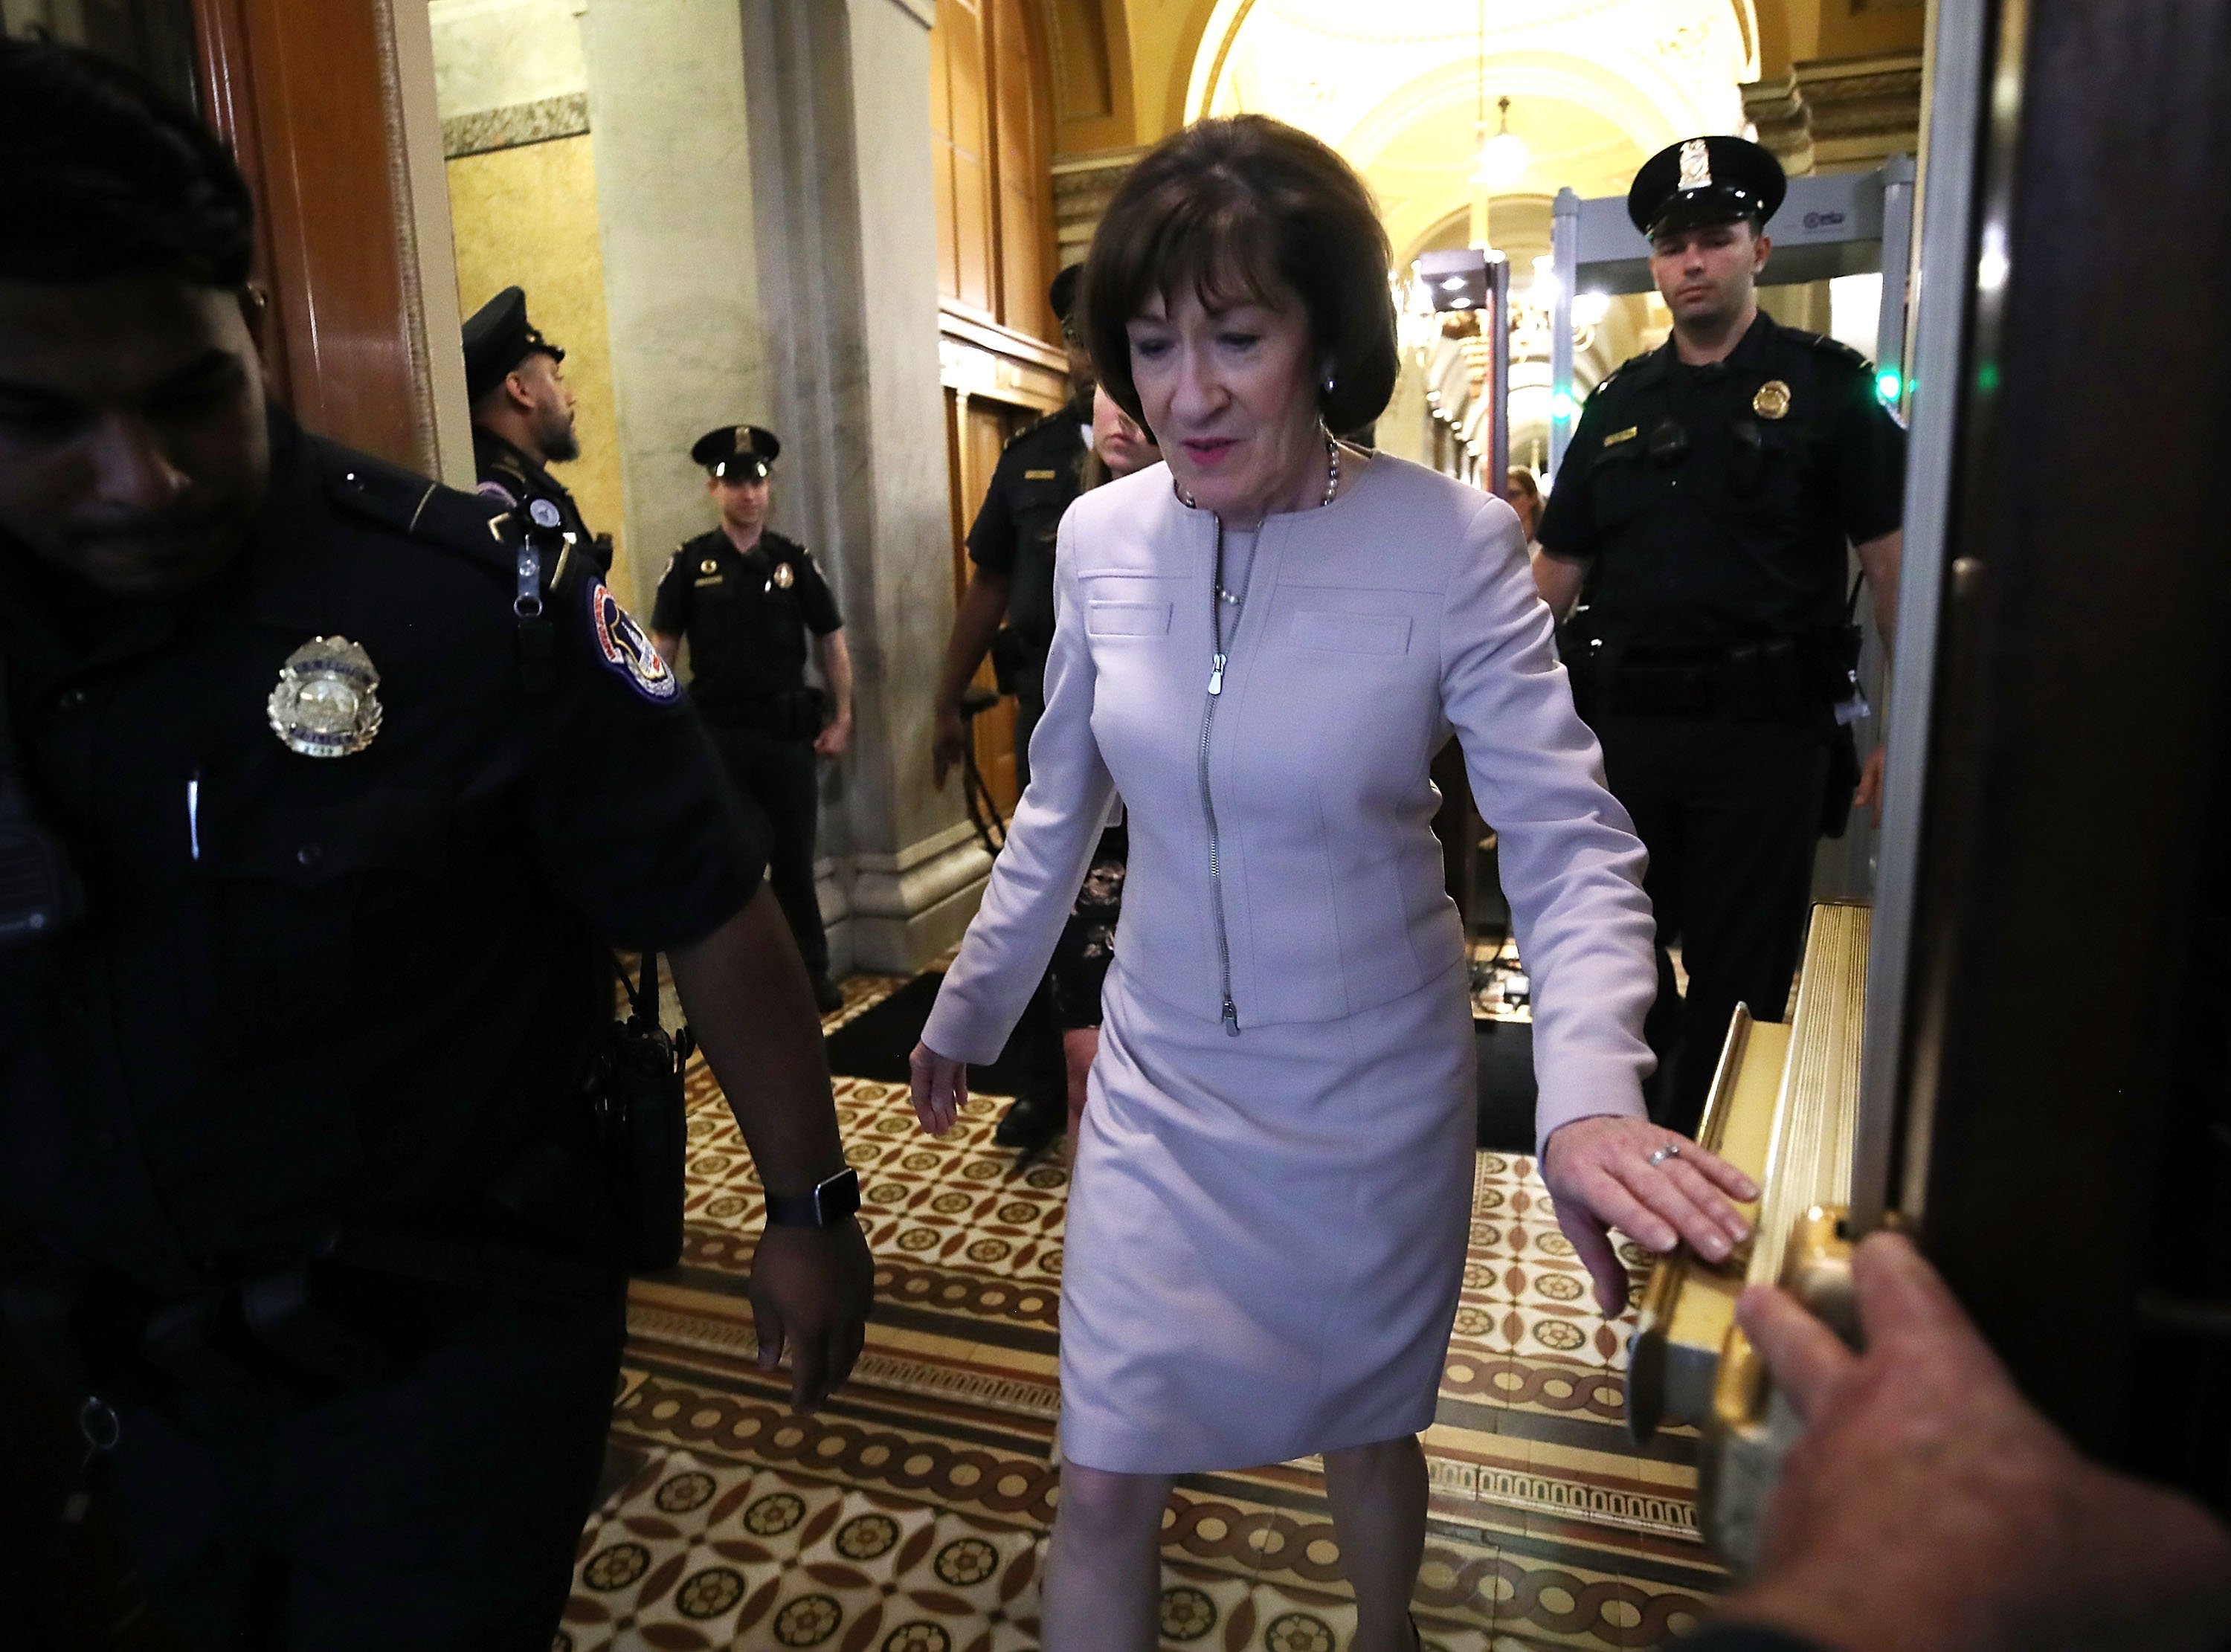 WASHINGTON, DC - OCTOBER 05: Sen. Susan Collins (R-ME) walks out of the carriage entrance of the U.S. Capitol after announcing that she would vote yes on the nomination of Supreme Court Judge Brett Kavanaugh to the U.S. Supreme Court, at the U.S. Capitol, October 5, 2018 in Washington, DC. The Senate voted 51-49 in a procedural vote to advance the nomination of Judge Brett Kavanaugh to the U.S. Supreme Court. (Photo by Mark Wilson/Getty Images)